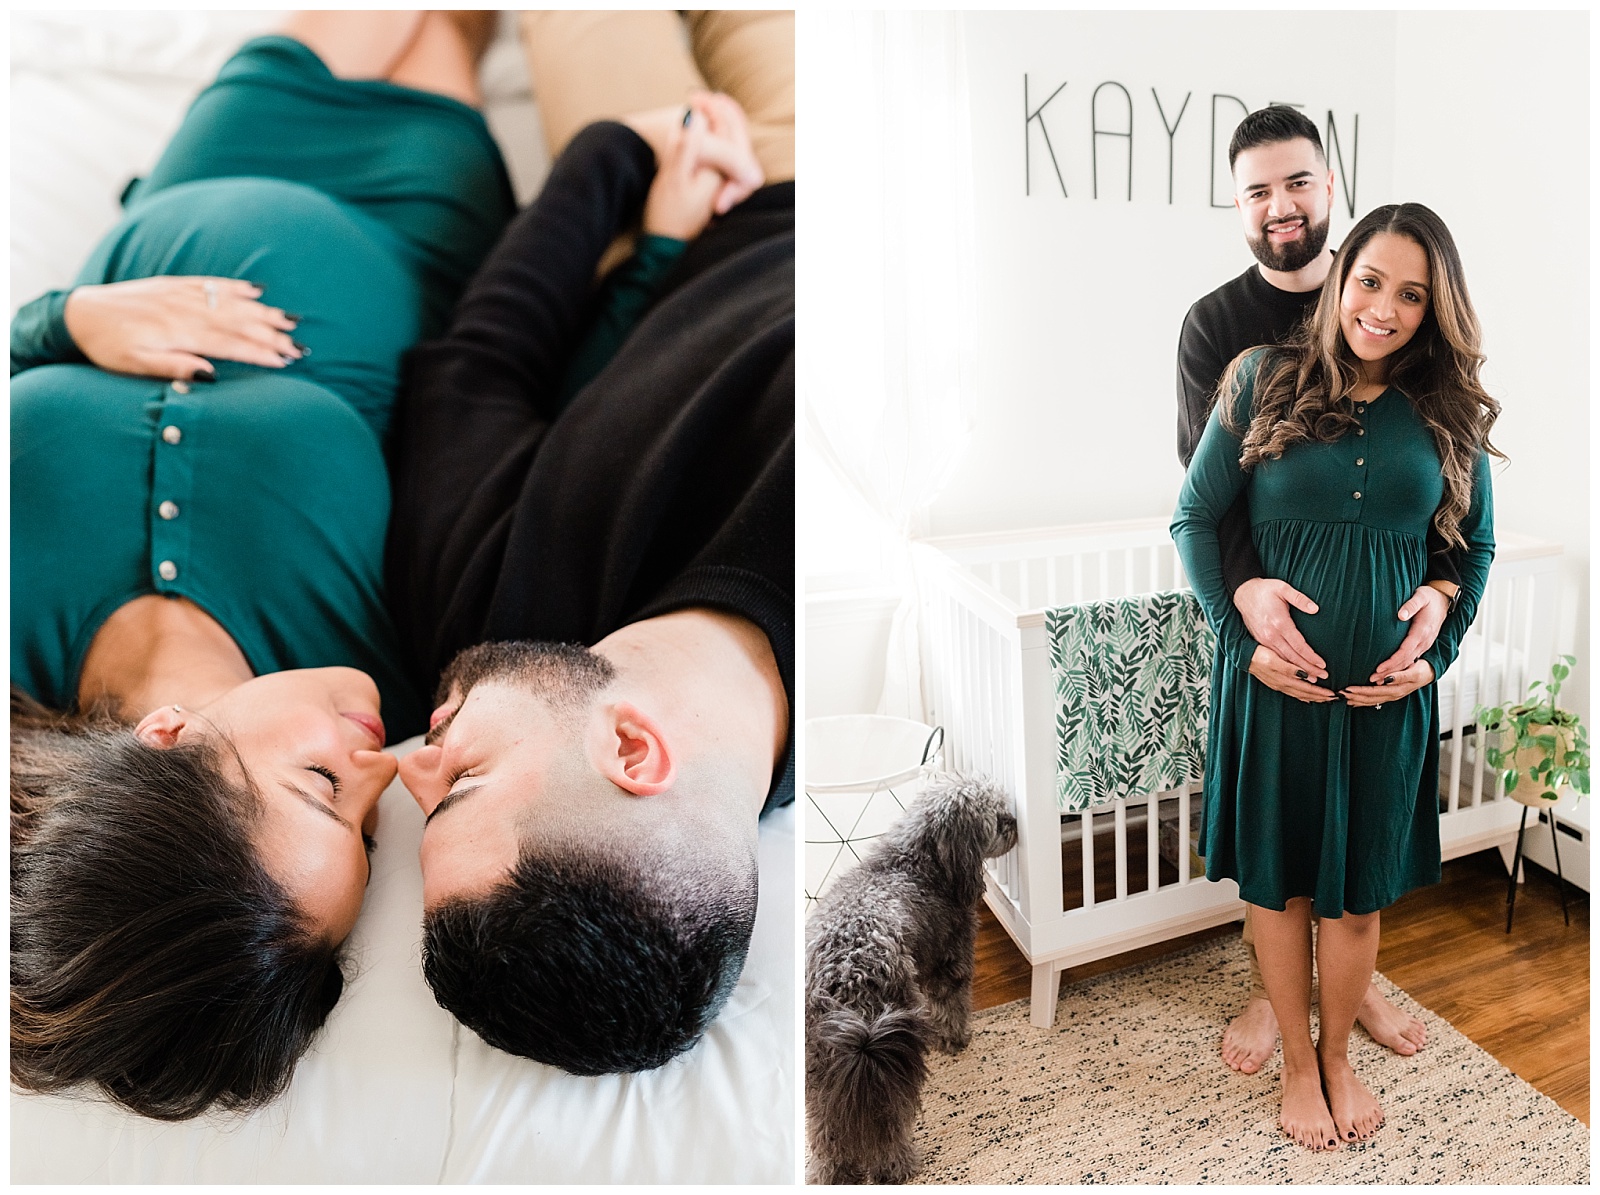 In Home Maternity Session, Nursery, Baby, New Parents, Maternity Shoot, Pregnant, Pregnancy Photos, New Jersey, Photographer, Baby Boy, Jungle Nursery, Photo, dog, pet